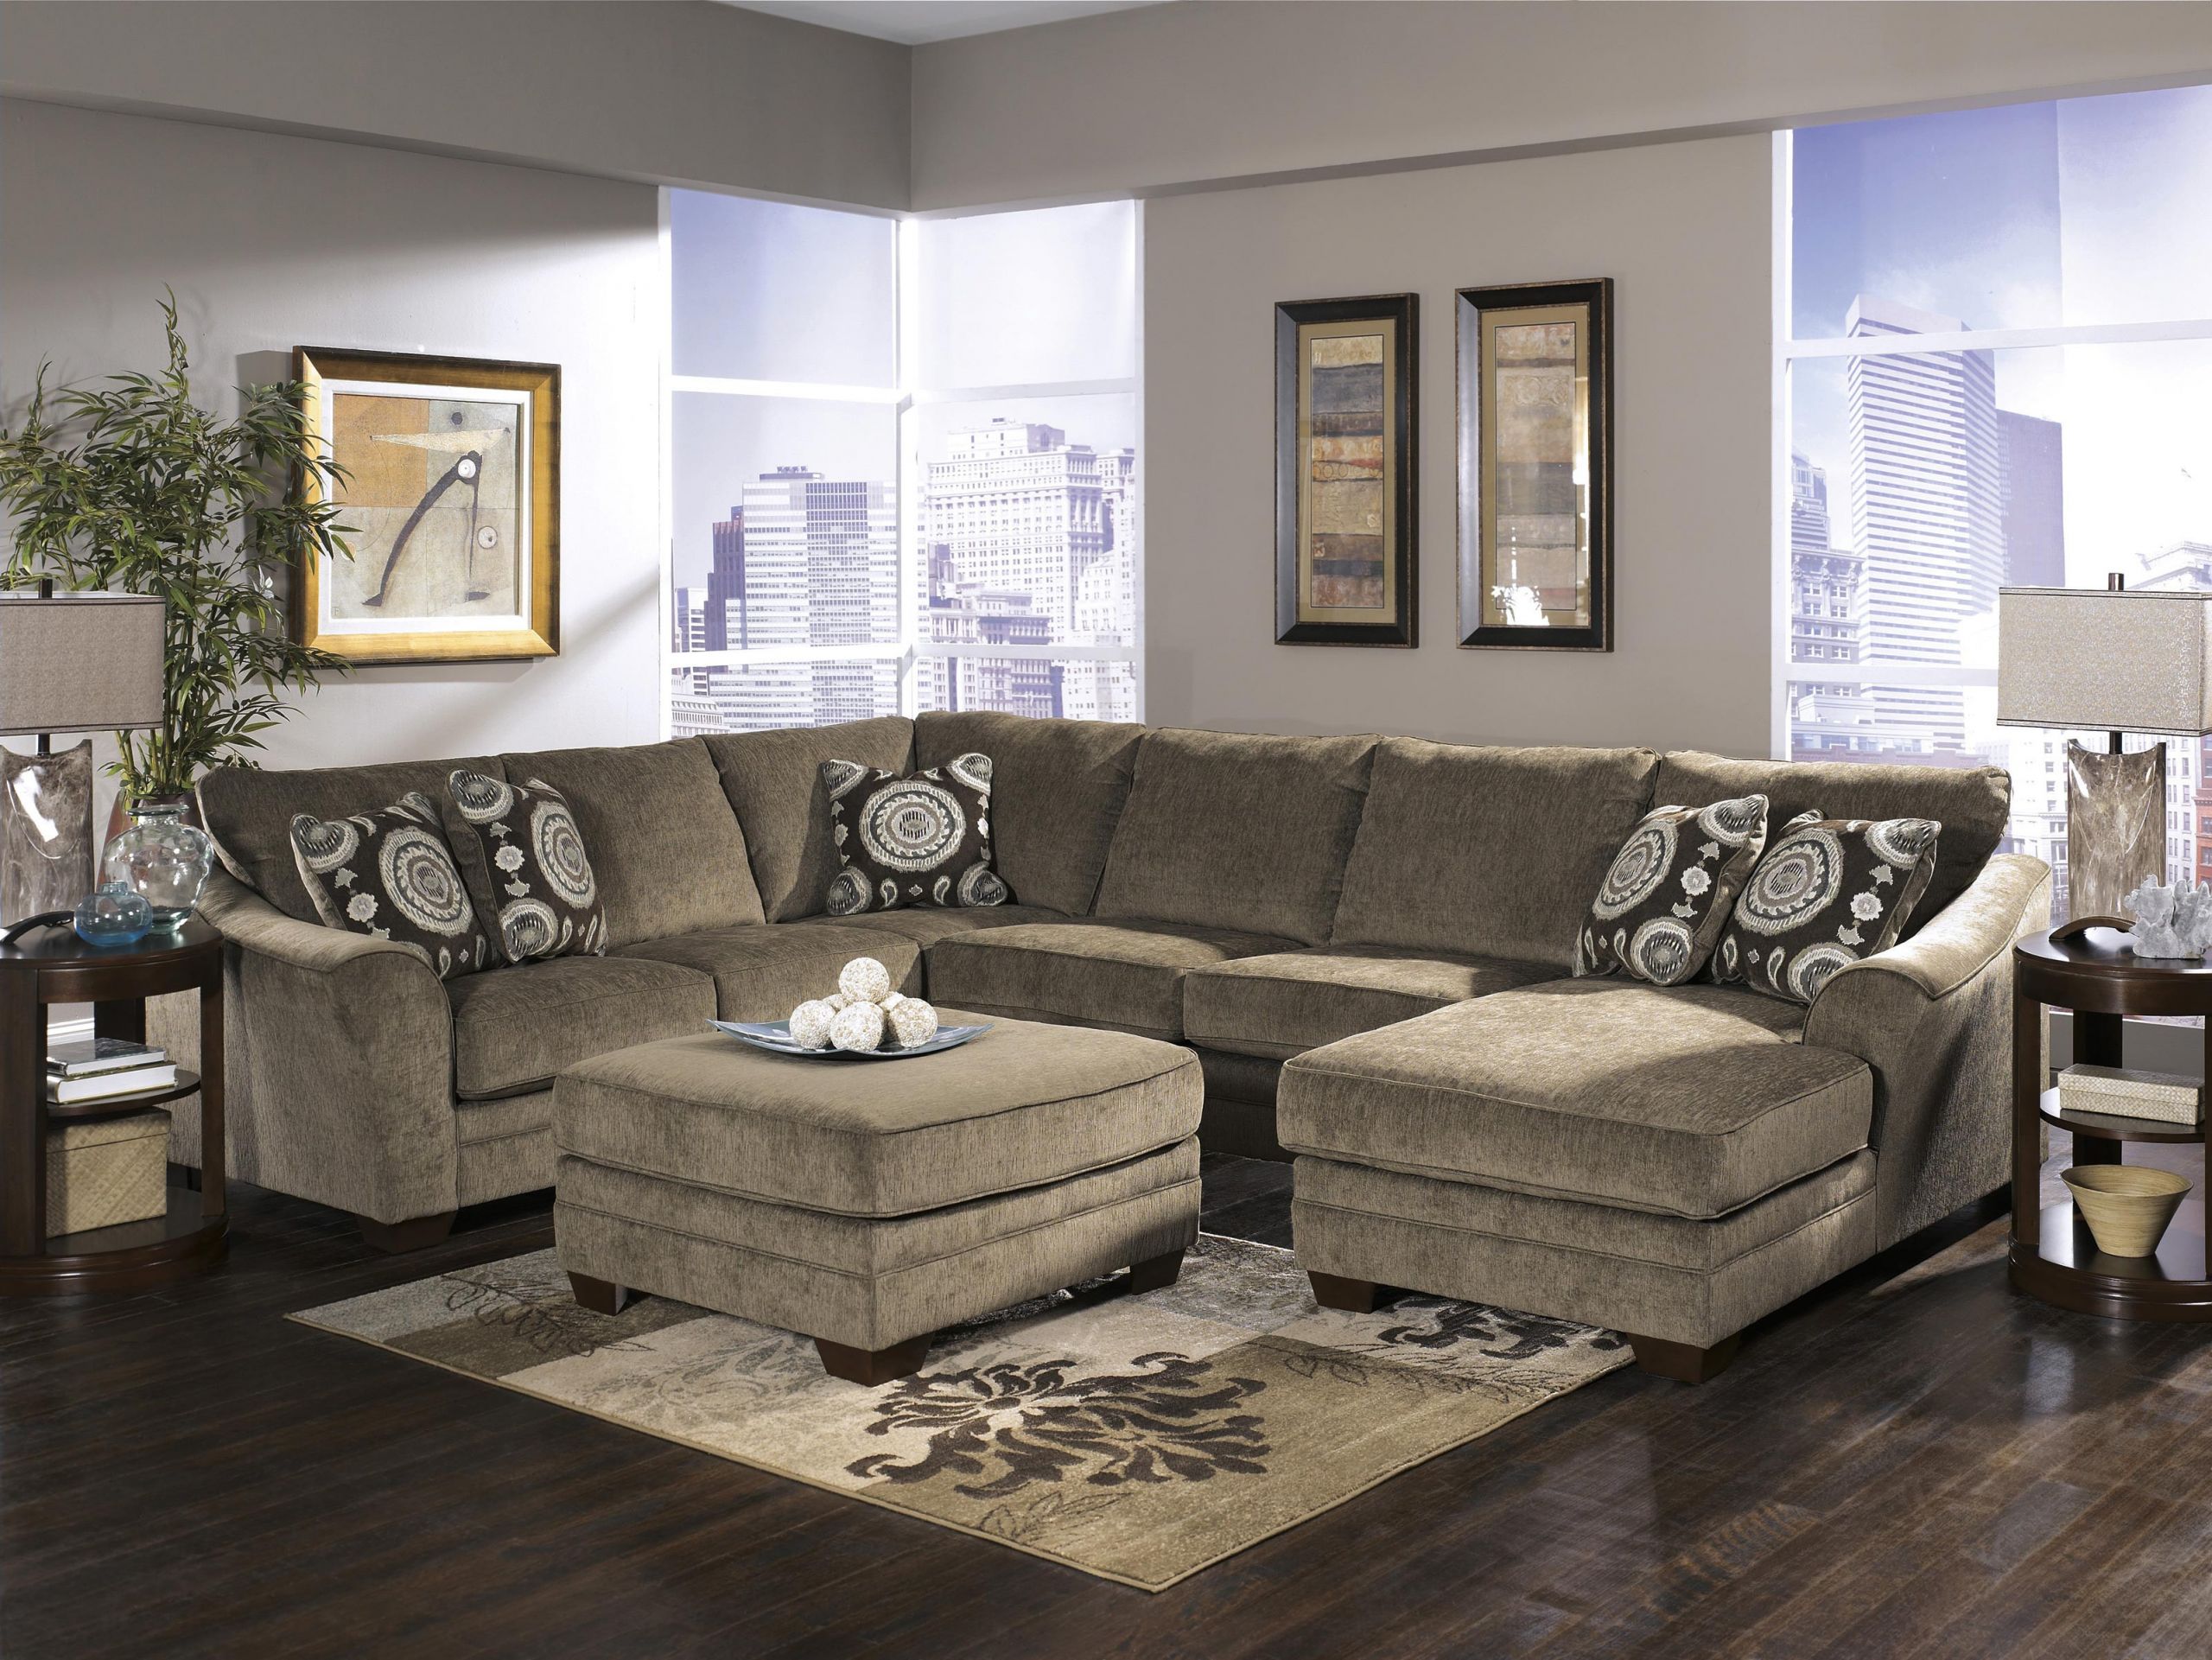 Living Room Decor With Sectional
 Living Room Ideas with Sectionals Sofa for Small Living